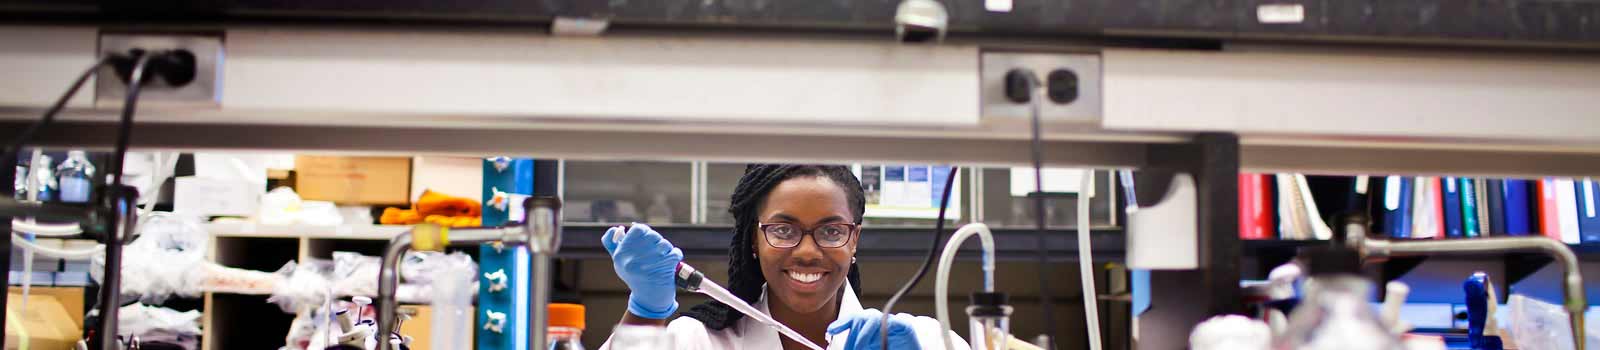 A graduate student holding a pipette and smiling in a laboratory